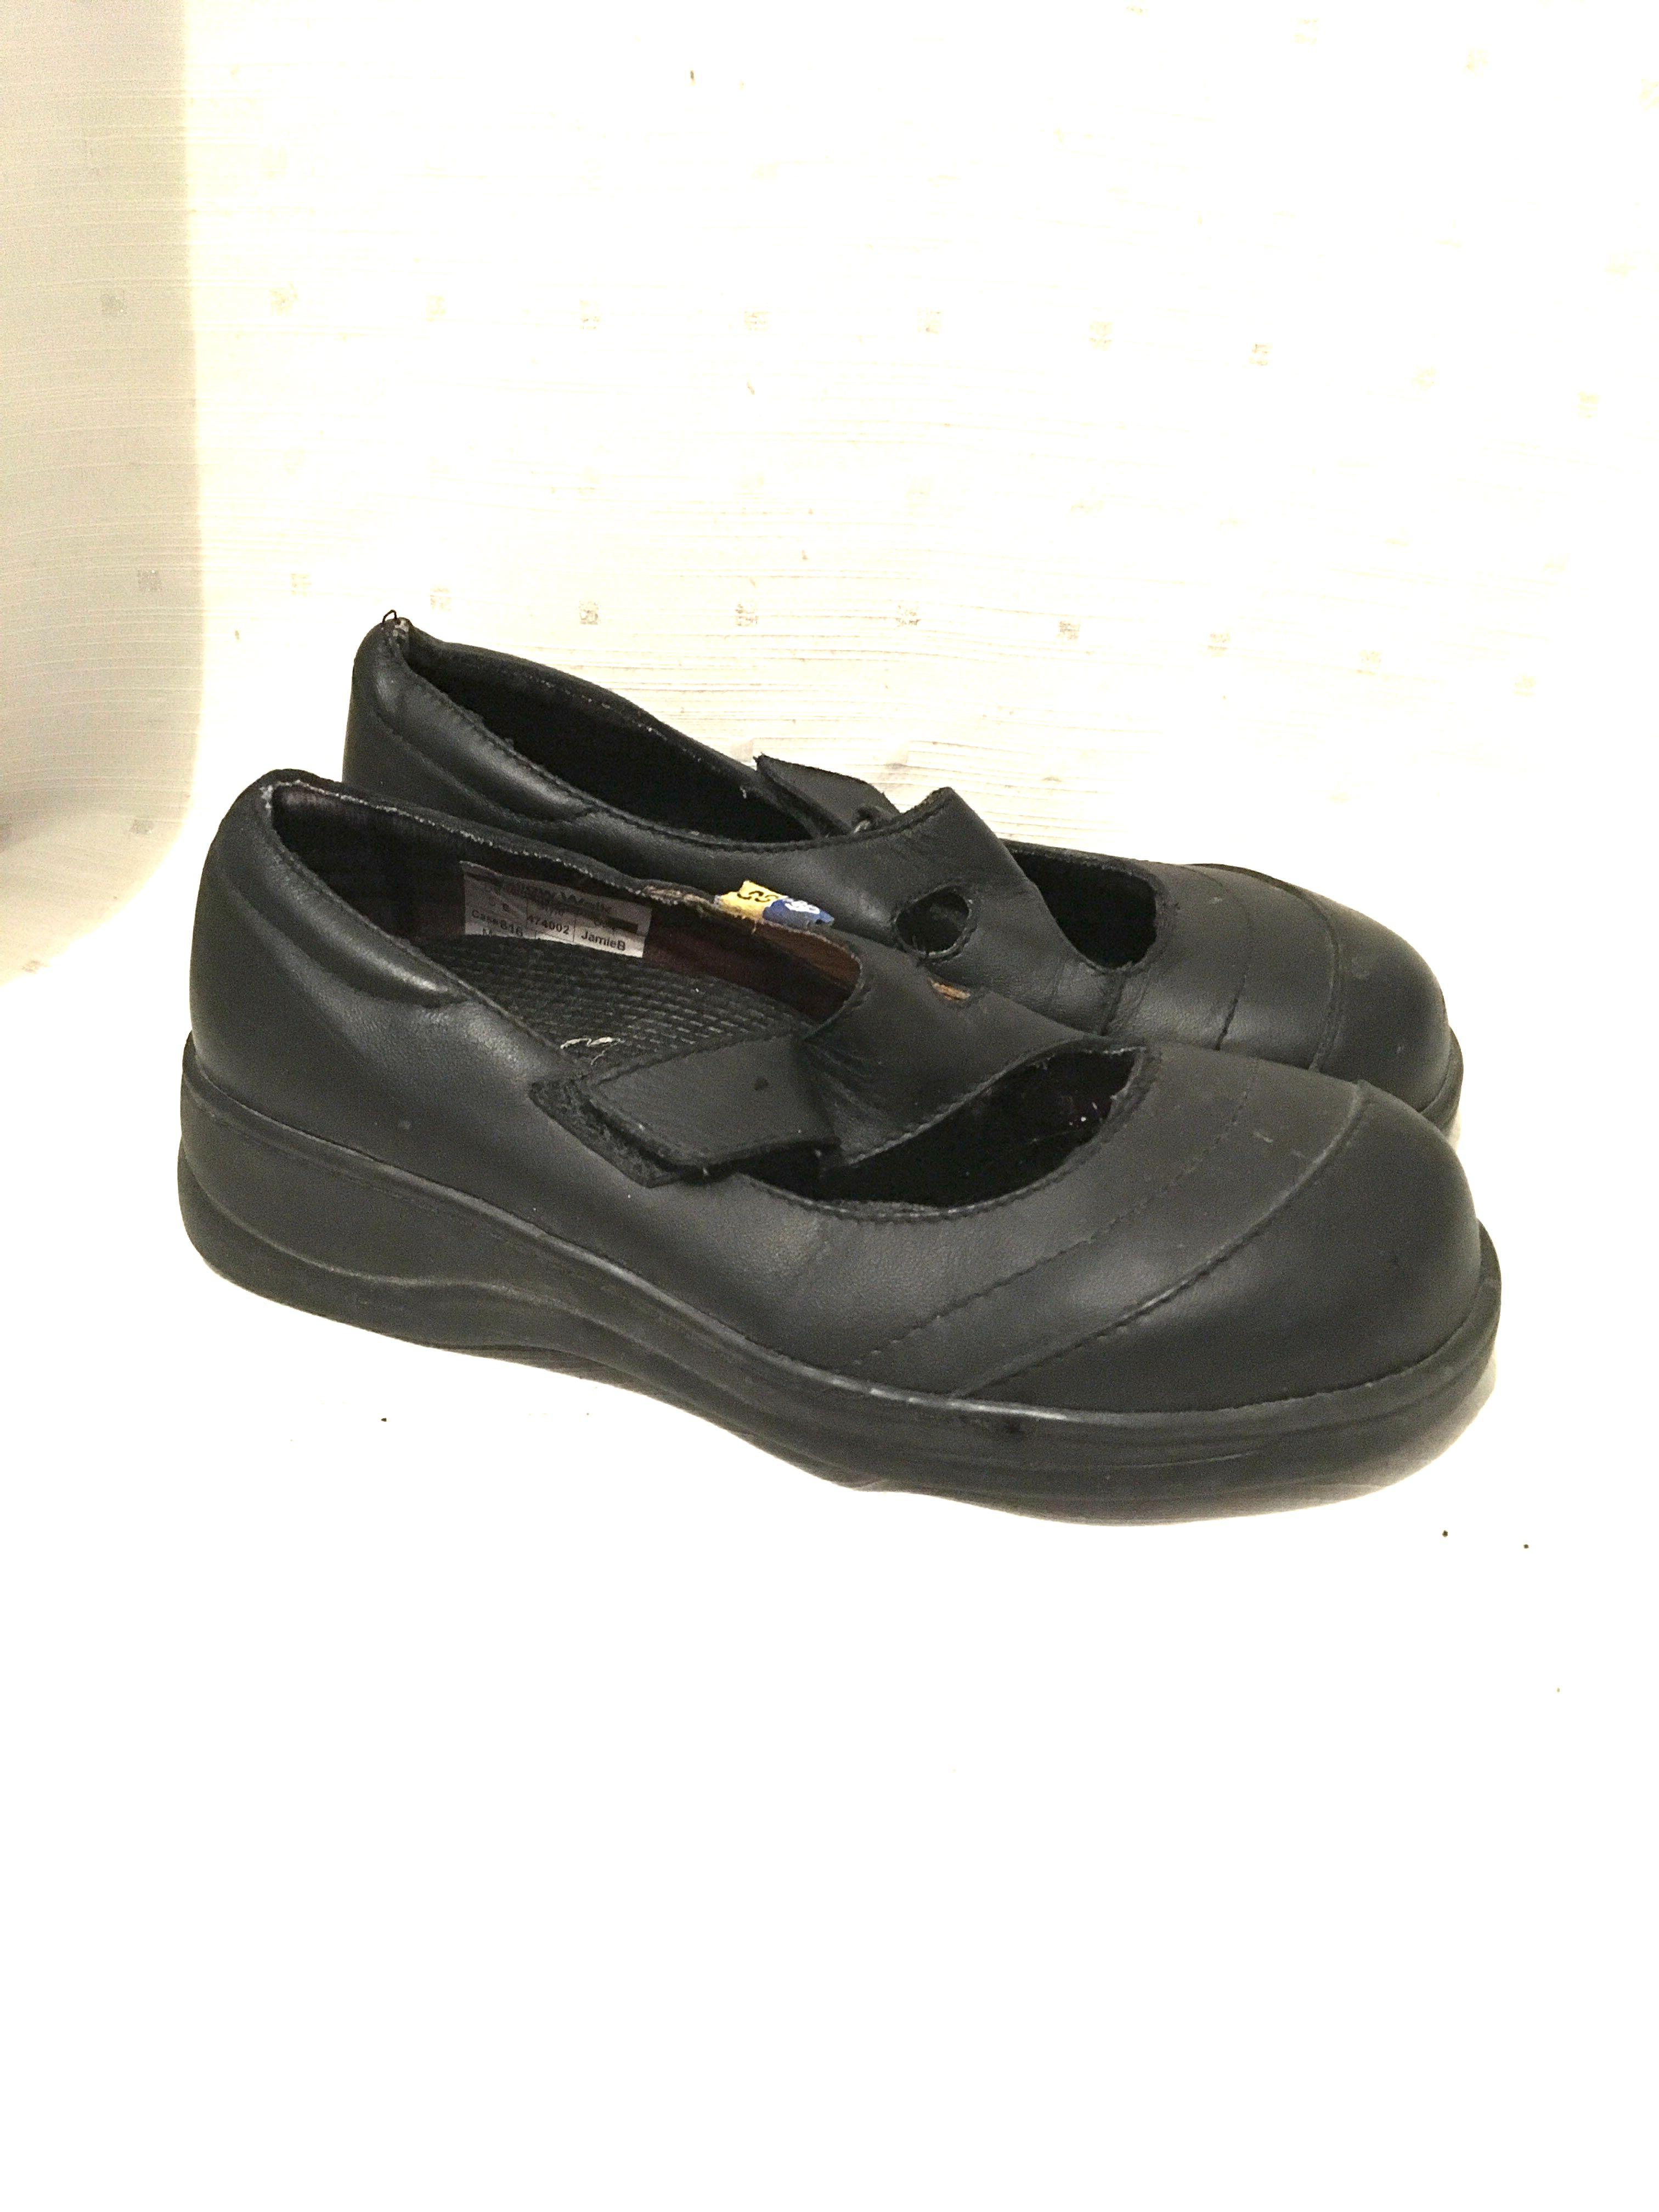 black leather shoes size 5